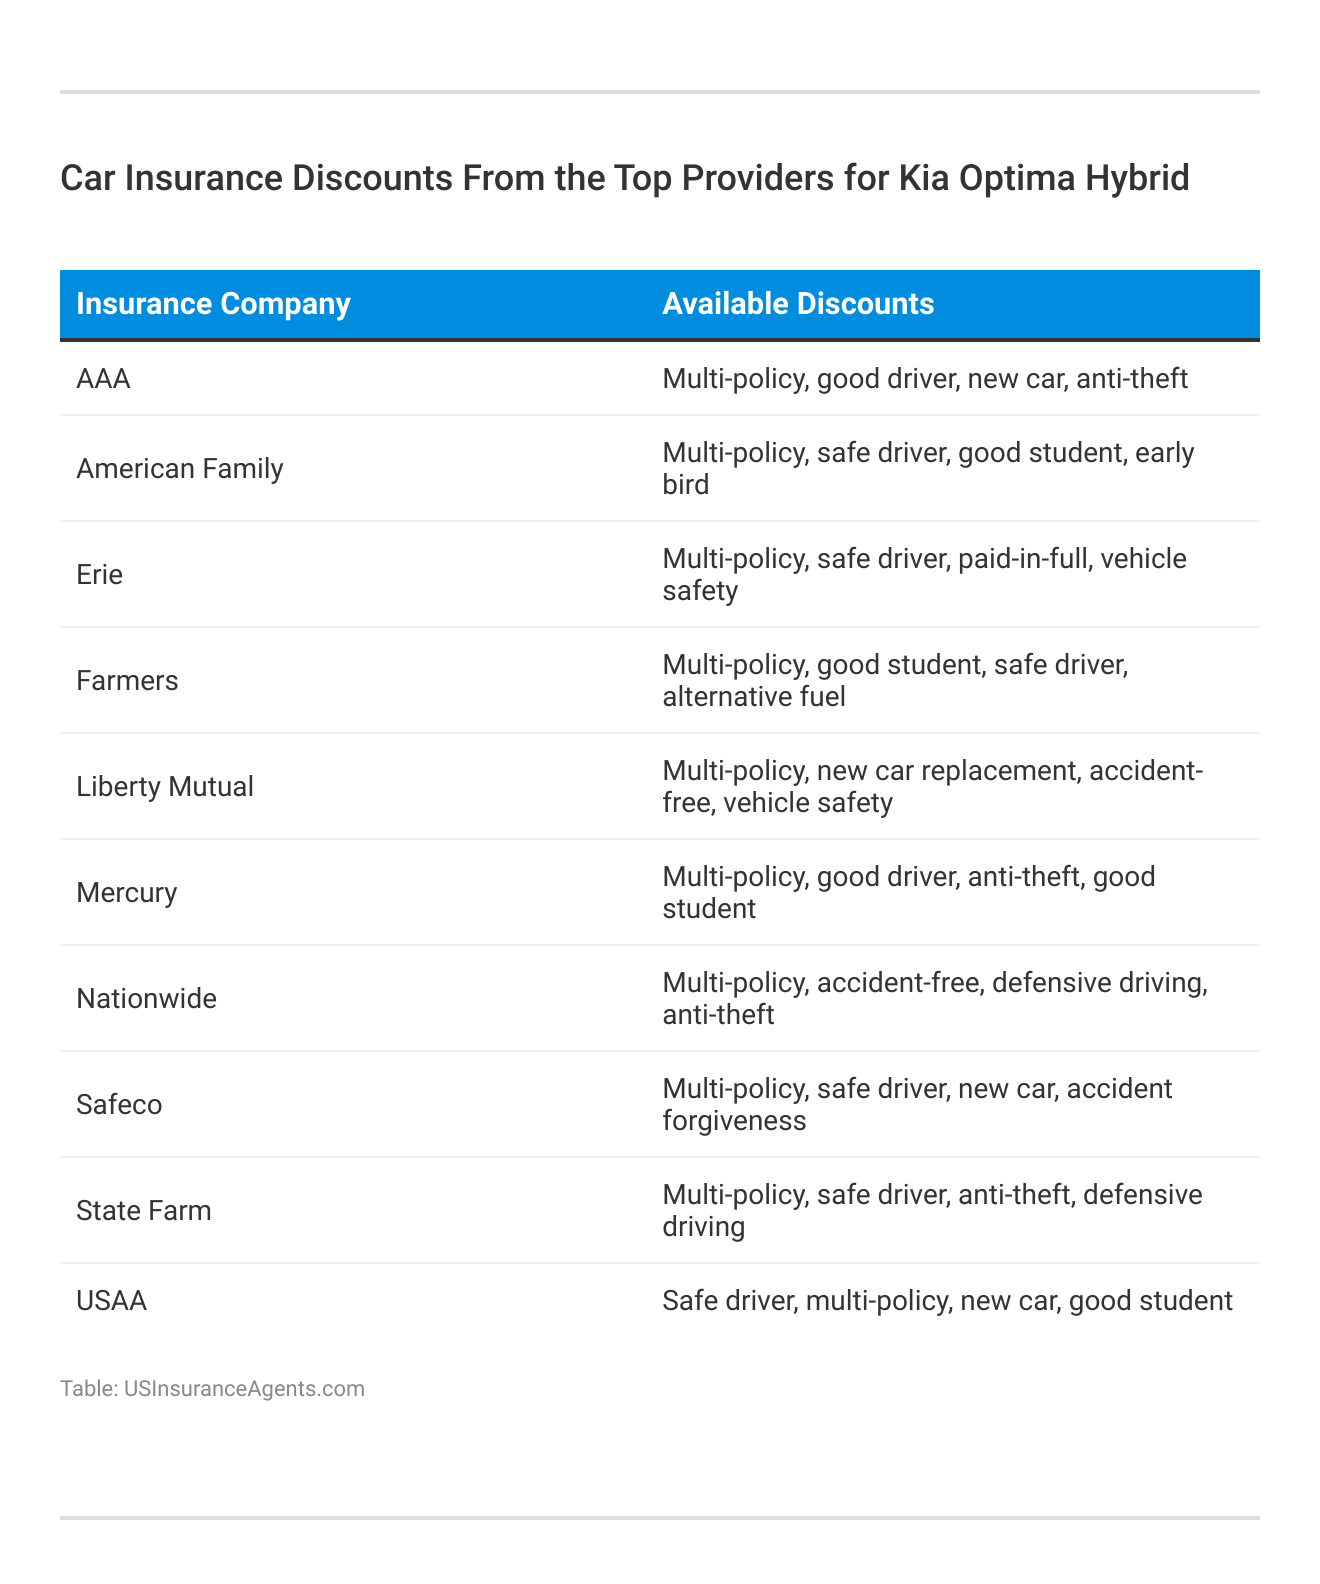 <h3>Car Insurance Discounts From the Top Providers for Kia Optima Hybrid</h3>